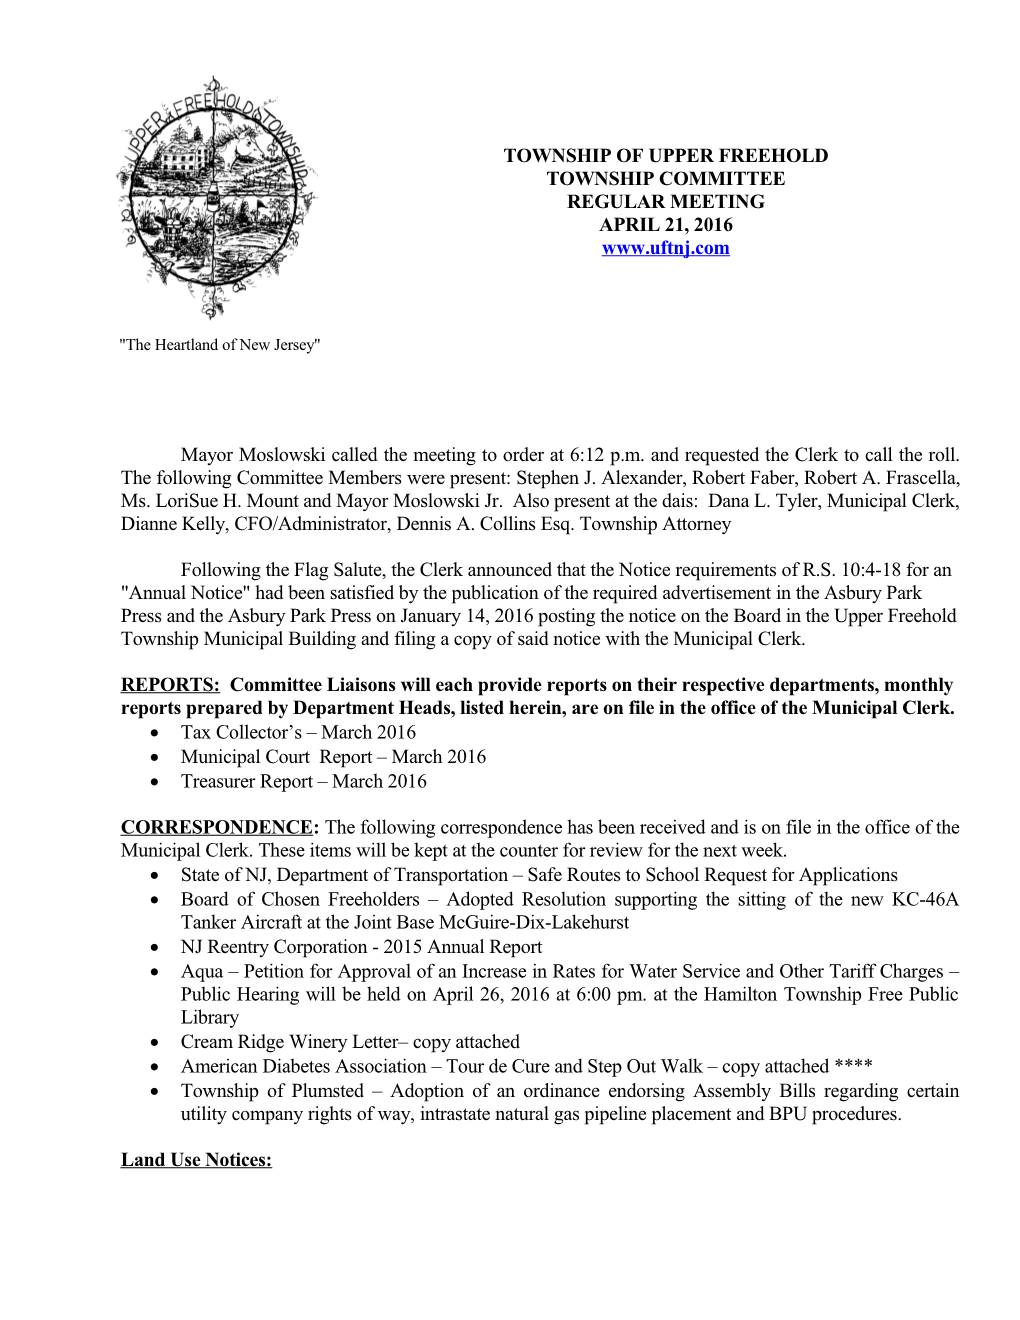 Upper Freehold Township Committee Regular Meeting April 21, 2016